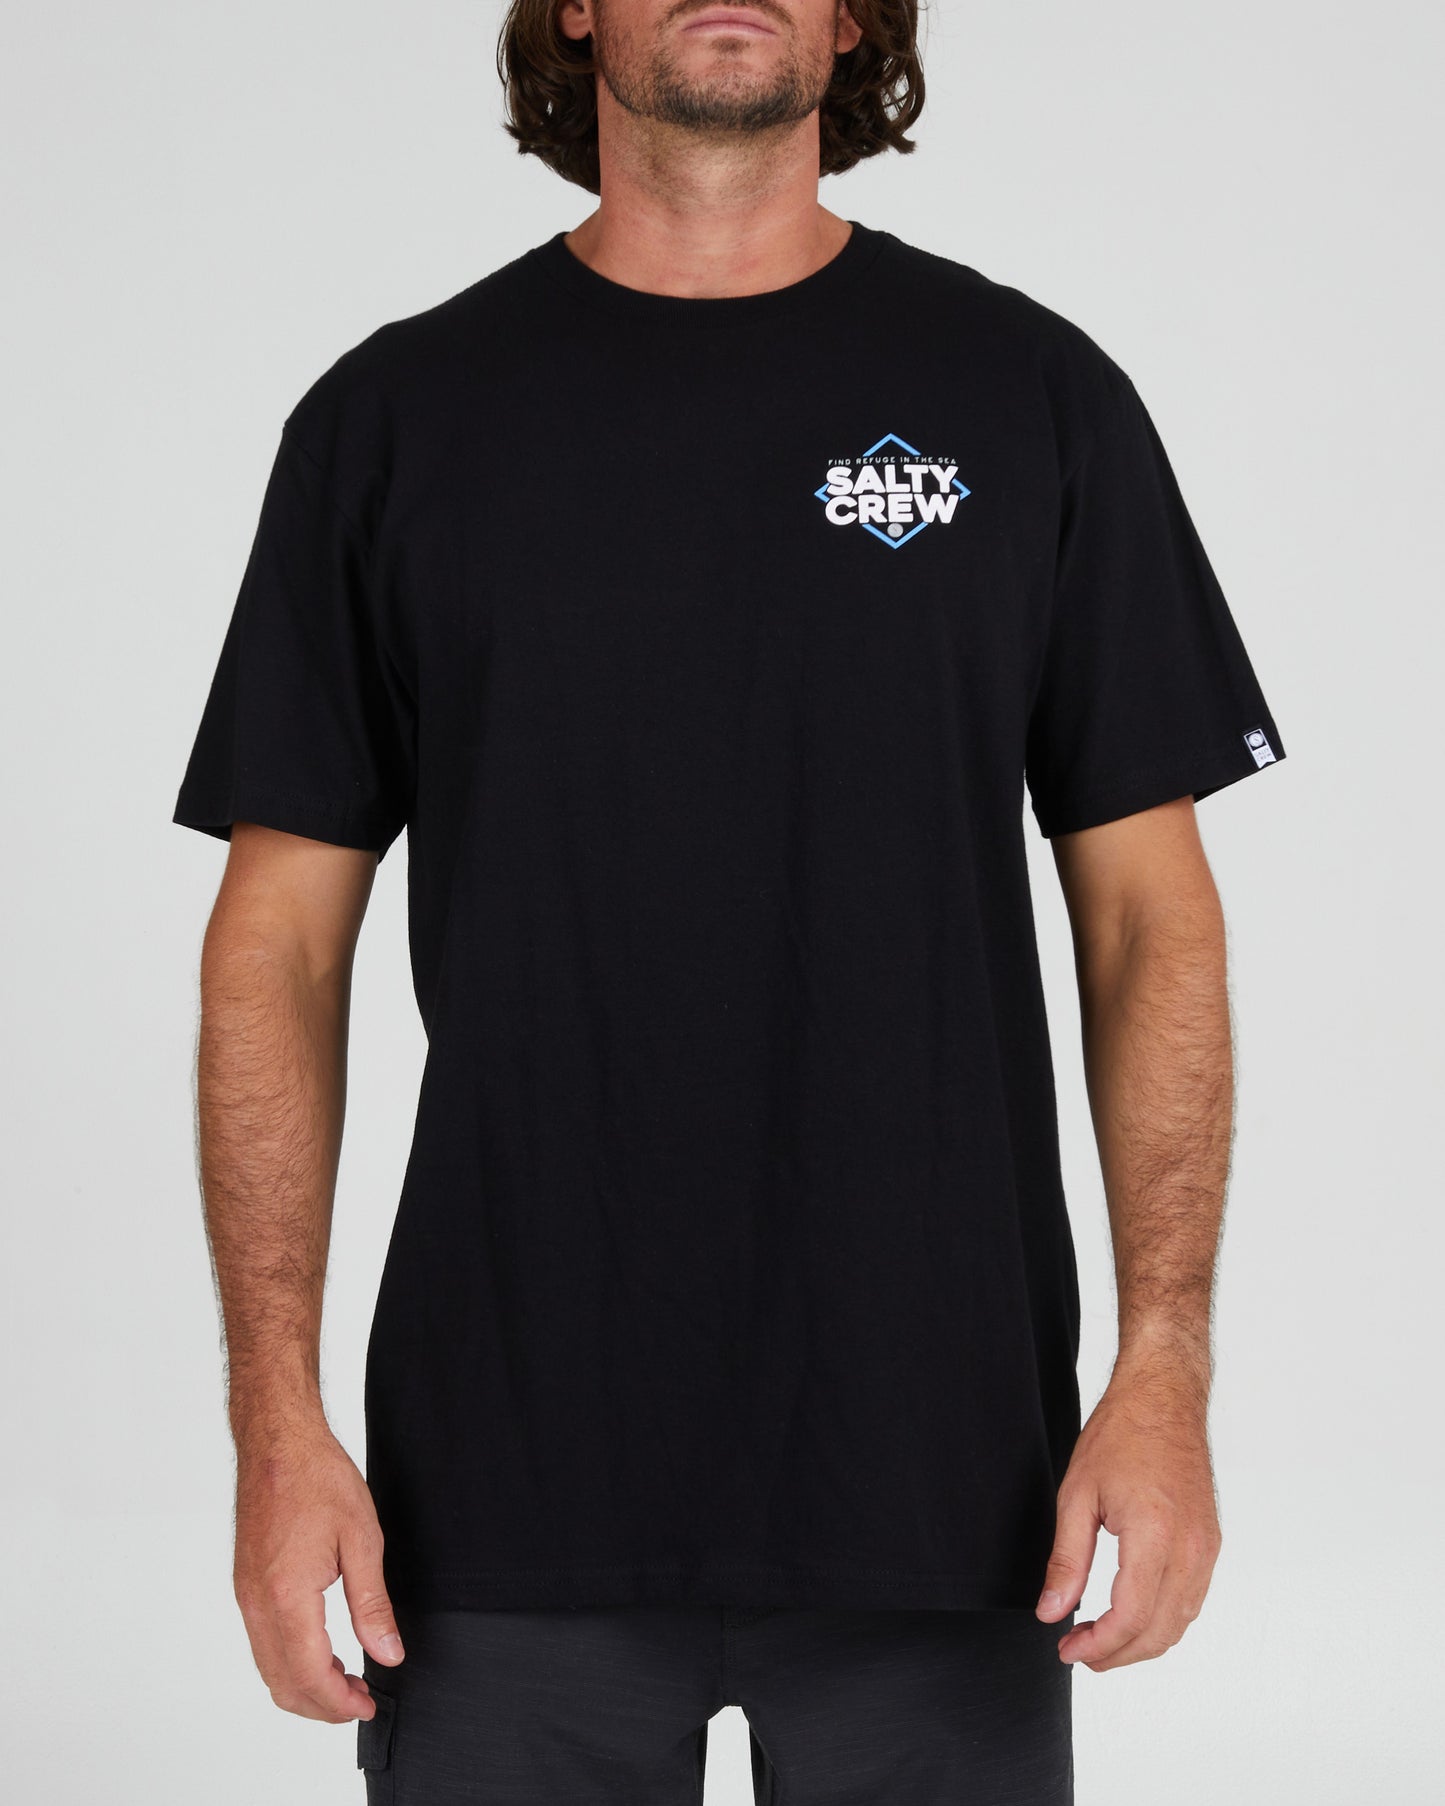 On body front of the No Slack Black S/S Standard Tee